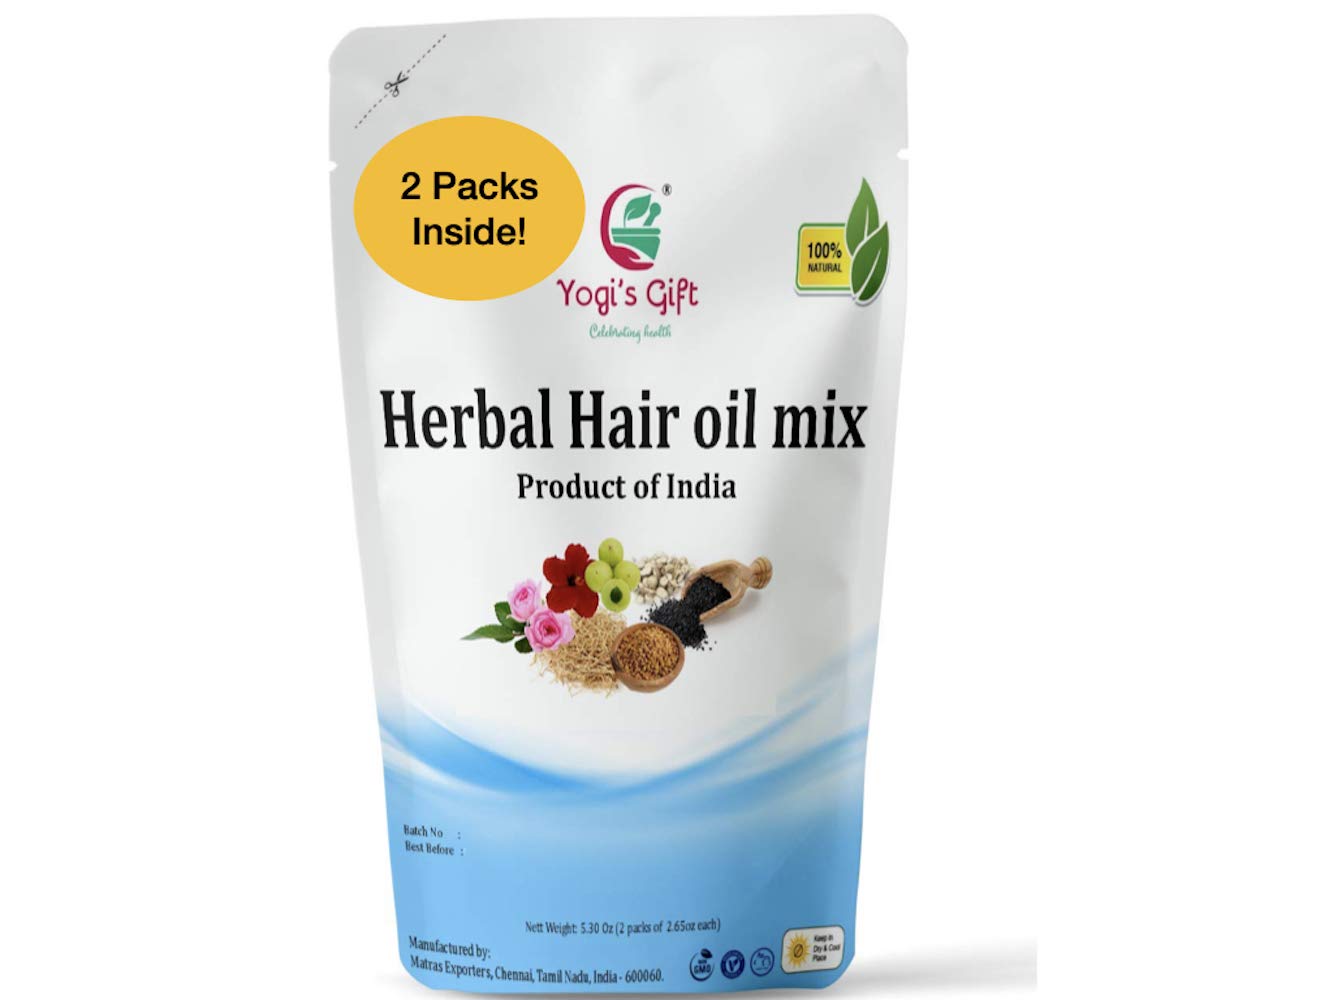 Herbal Hair Oil Mix | 2 packs | 18 Essential Herbs For Hair Growth Oil | Natural Ayurvedic Herbs | Product Of India |Yogi’s Gift®